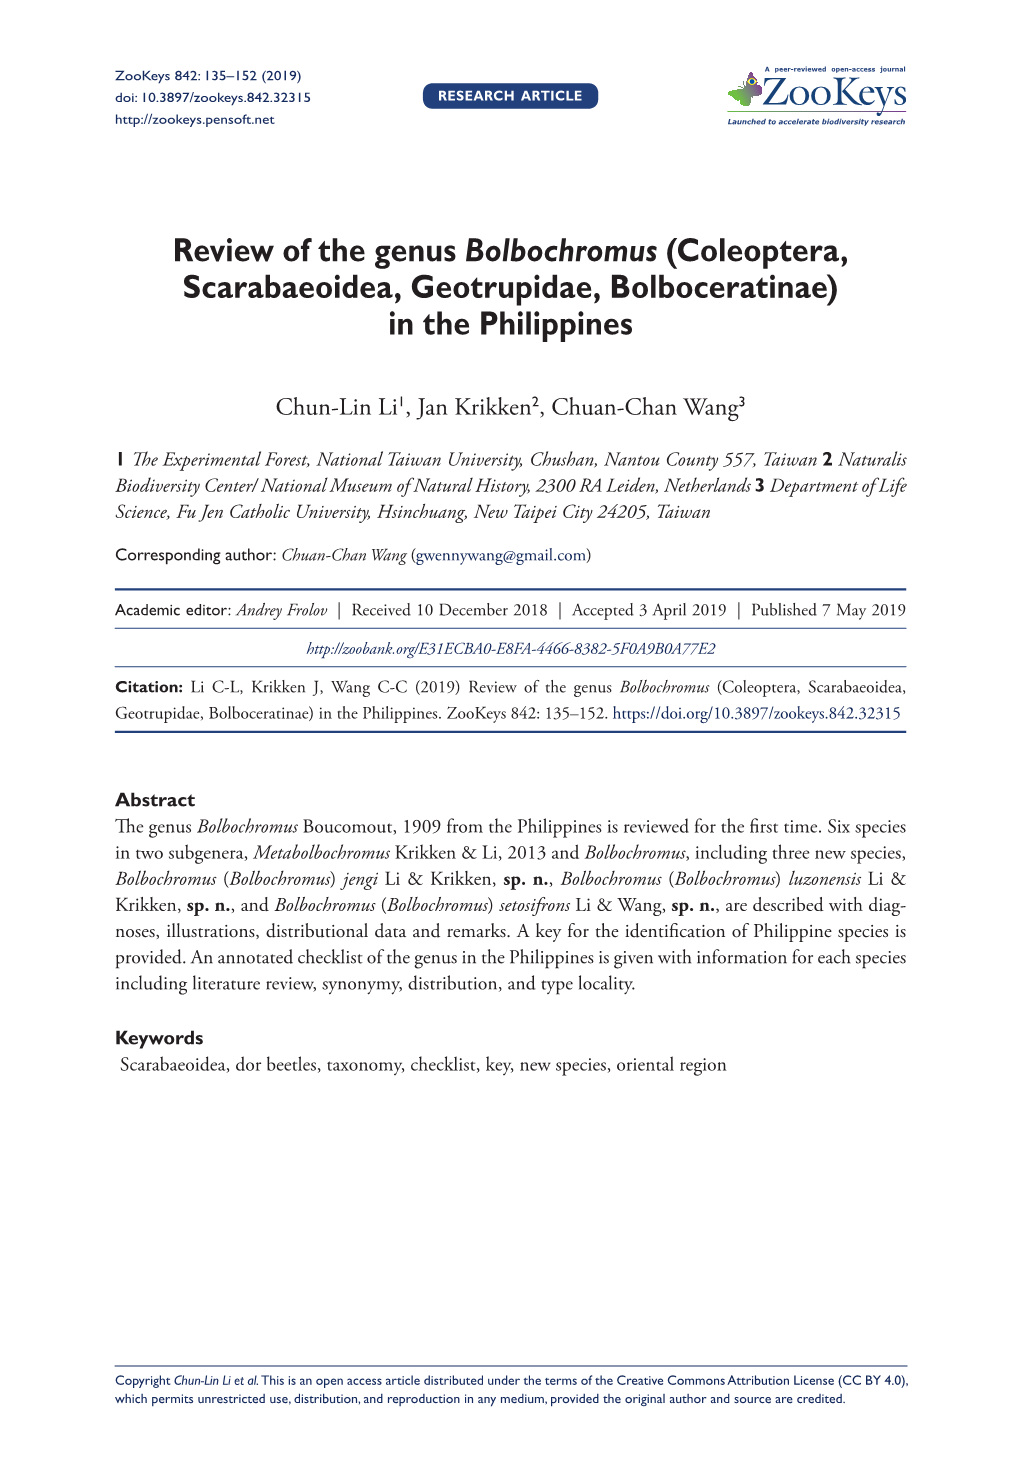 Review of the Genus Bolbochromus (Coleoptera, Scarabaeoidea, Geotrupidae, Bolboceratinae) in the Philippines